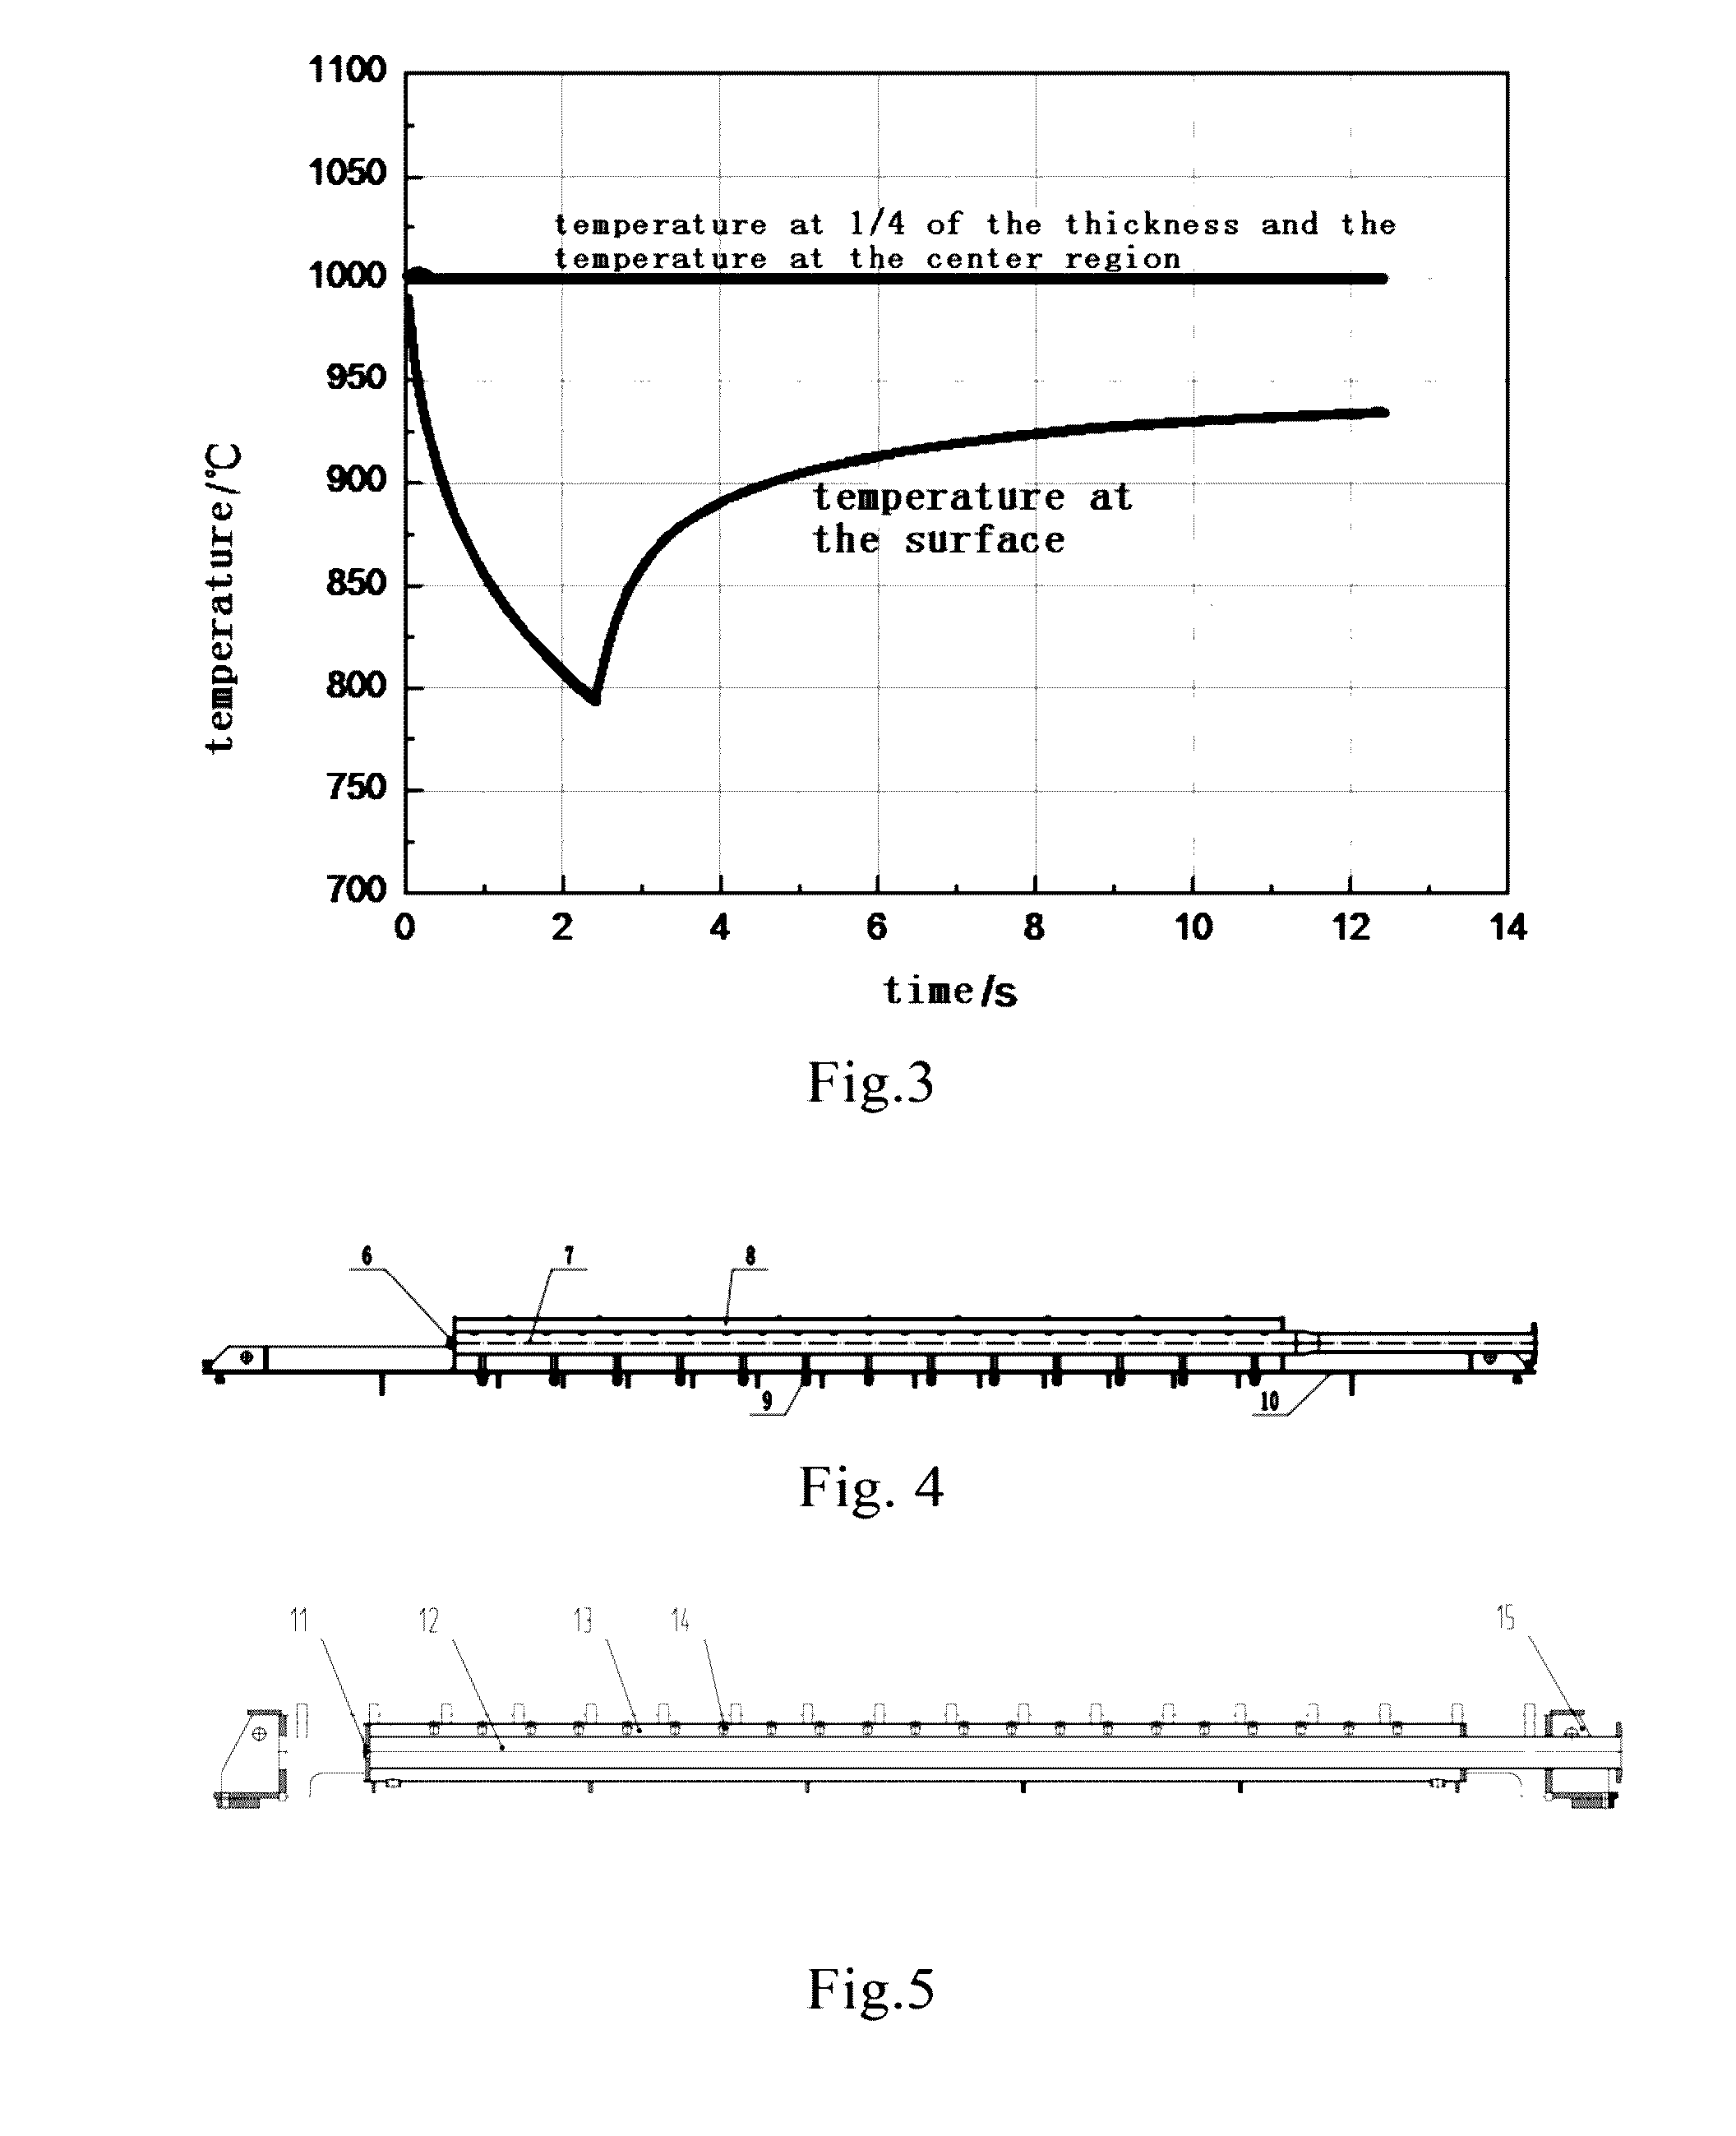 Cooling method and on-line cooling system for controlled rolling with inter-pass cooling process